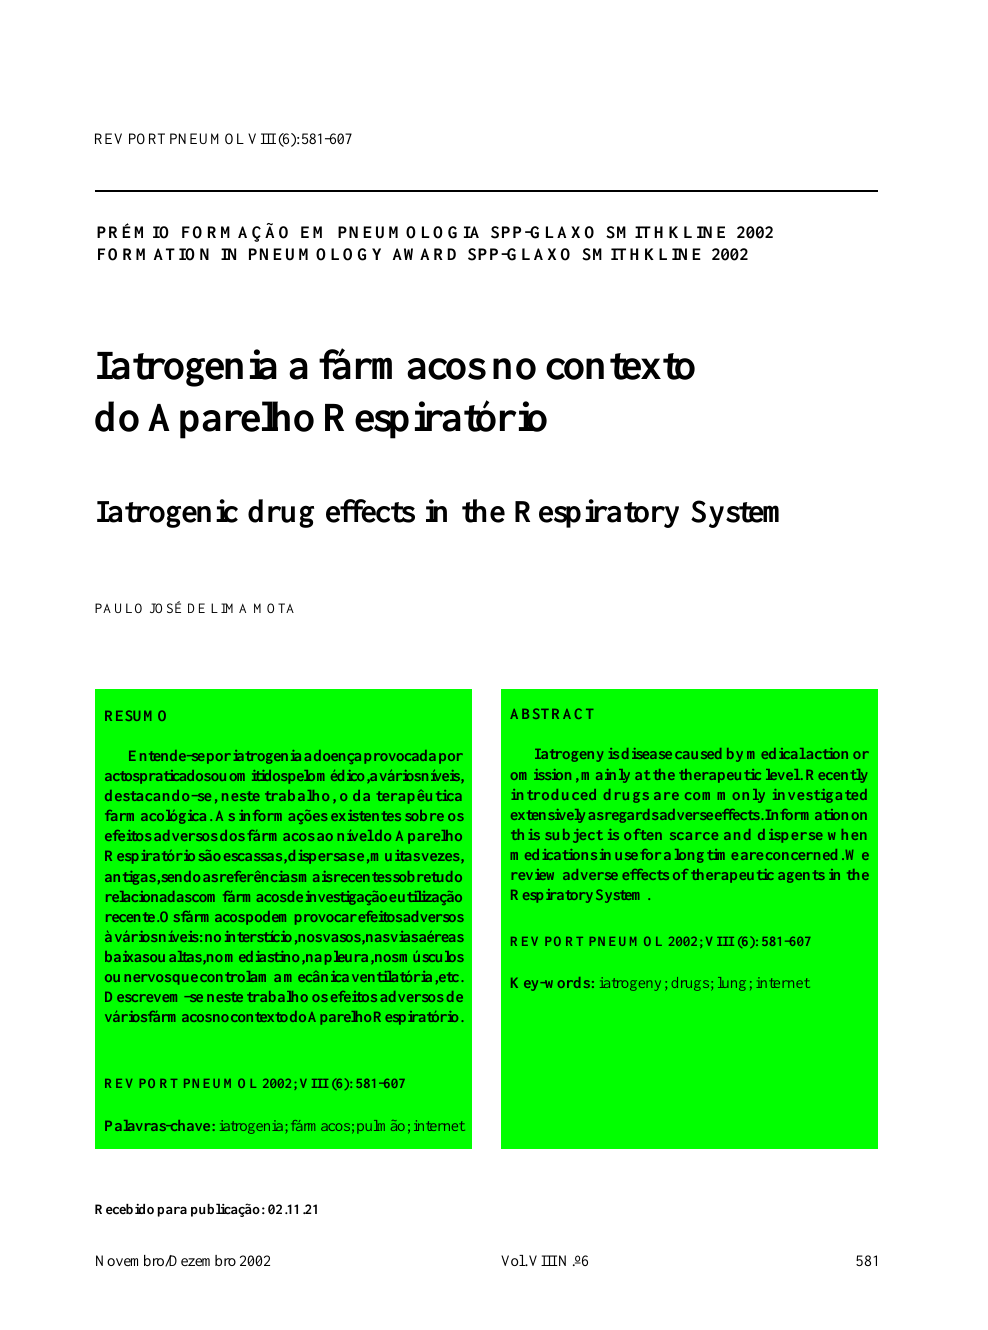 Iatrogenia a fármacos no contexto do Aparelho Respiratório – topic of  research paper in Clinical medicine. Download scholarly article PDF and  read for free on CyberLeninka open science hub.